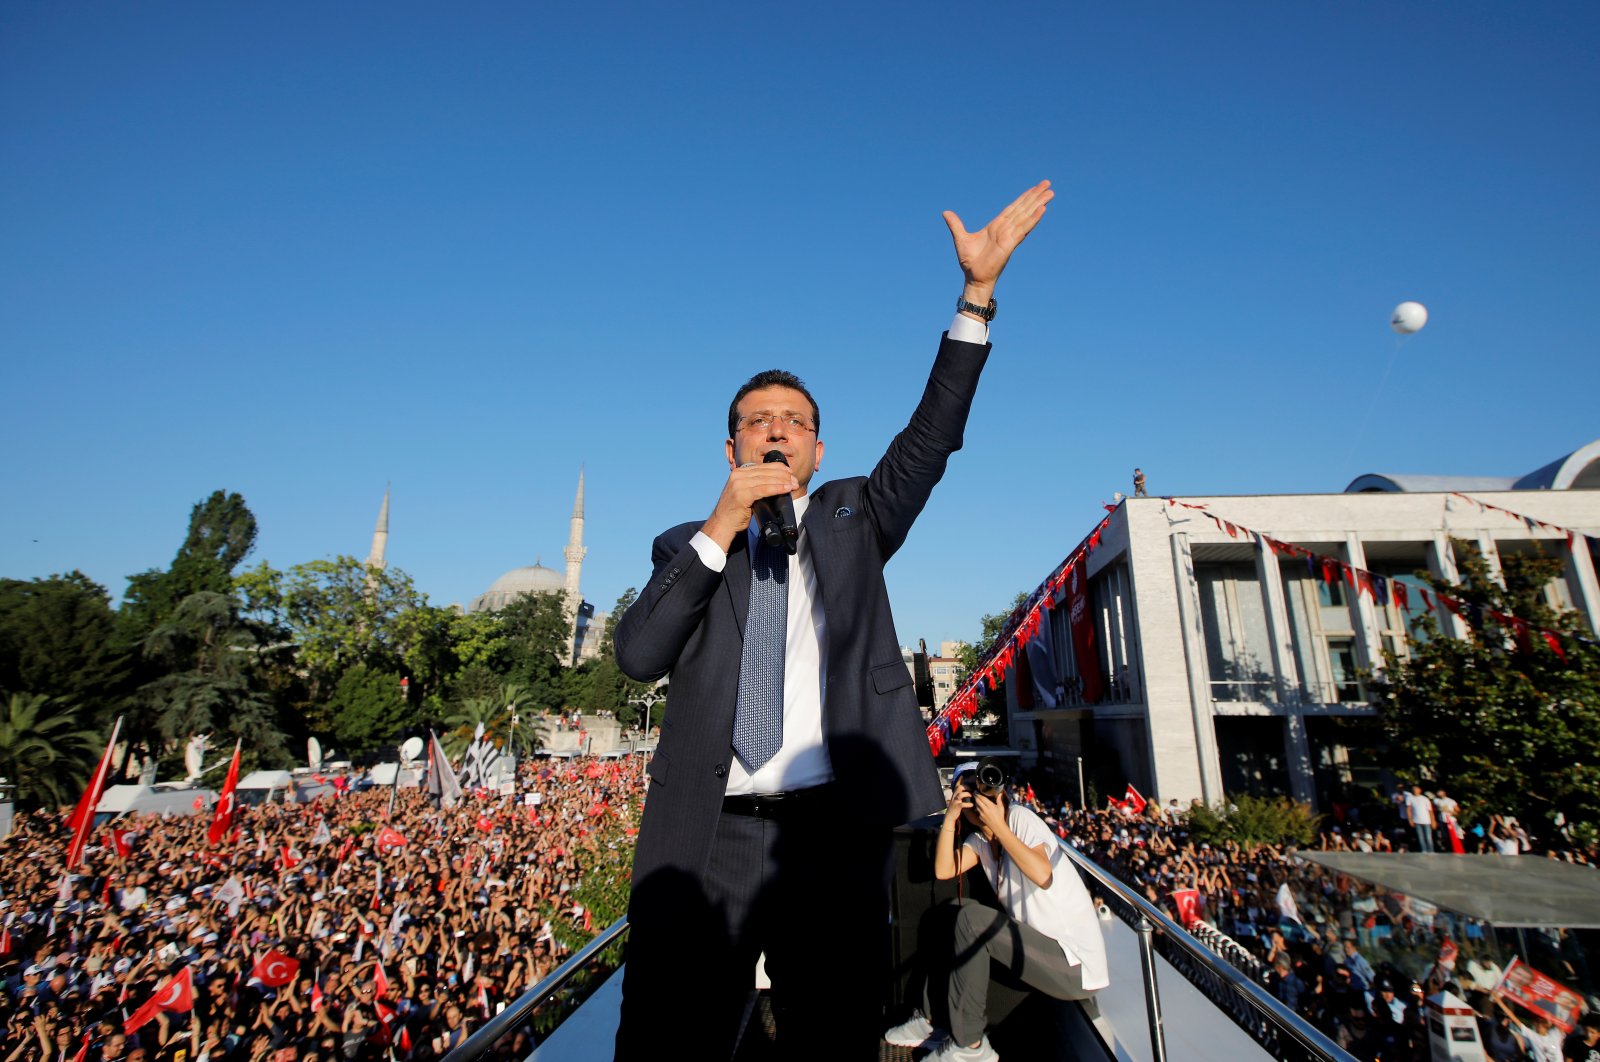 Istanbul Mayor Ekrem Imamoğlu of the main opposition Republican People's Party (CHP) addresses his supporters from the top of a bus outside City Hall in Istanbul, Turkey, June 27, 2019. (Reuters File Photo)